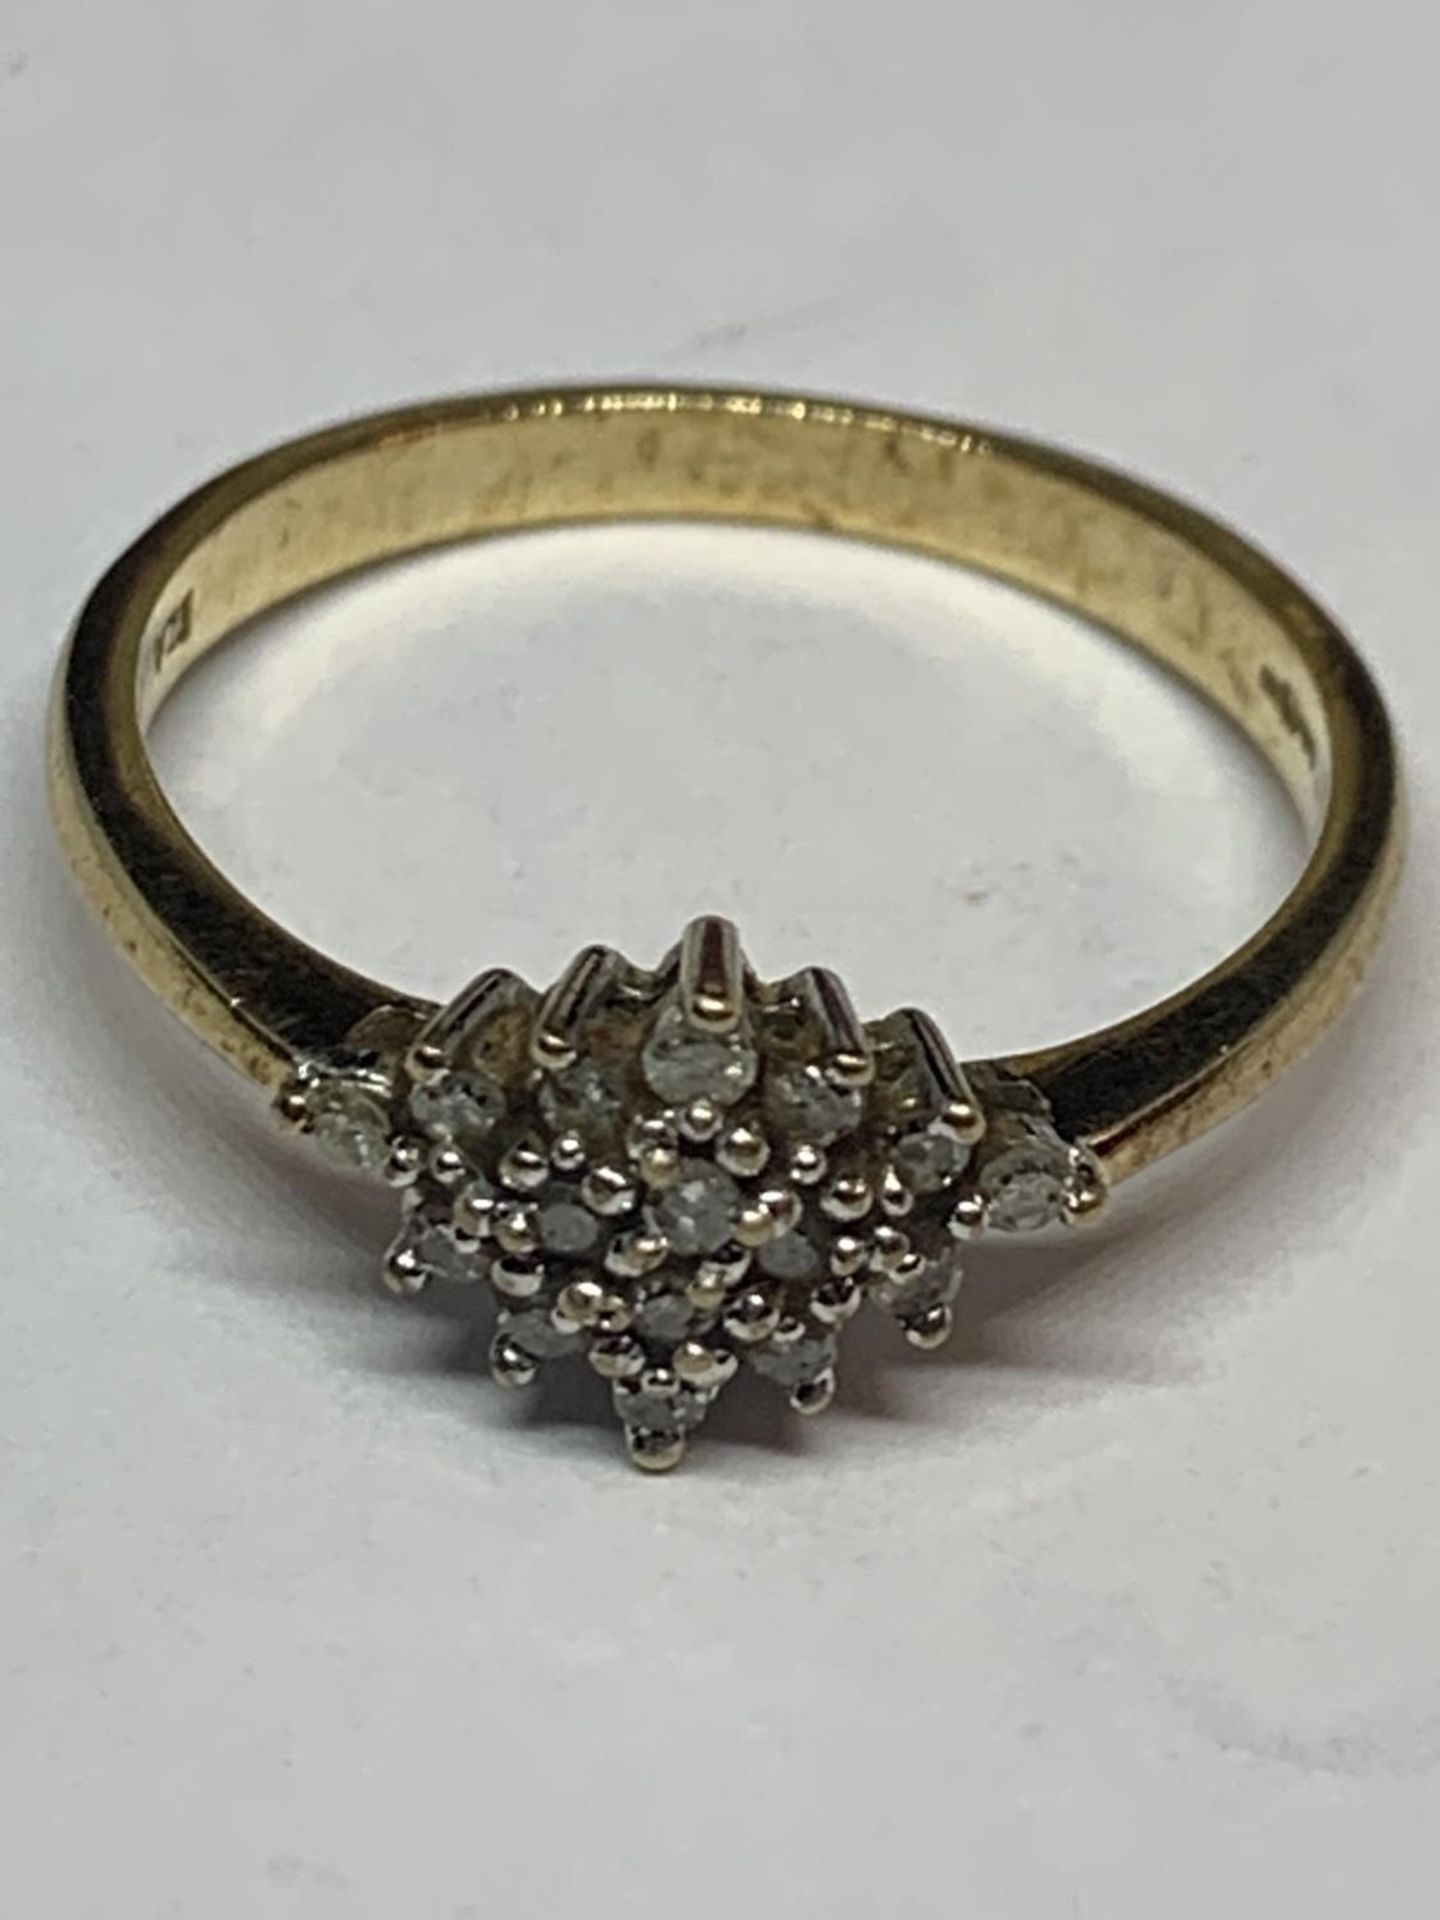 A 9 CARAT GOLD RING WITH DIAMONDS IN A DIAMOND SHAPE DESIGN SIZE 0 WITH PRESENTATION BOX